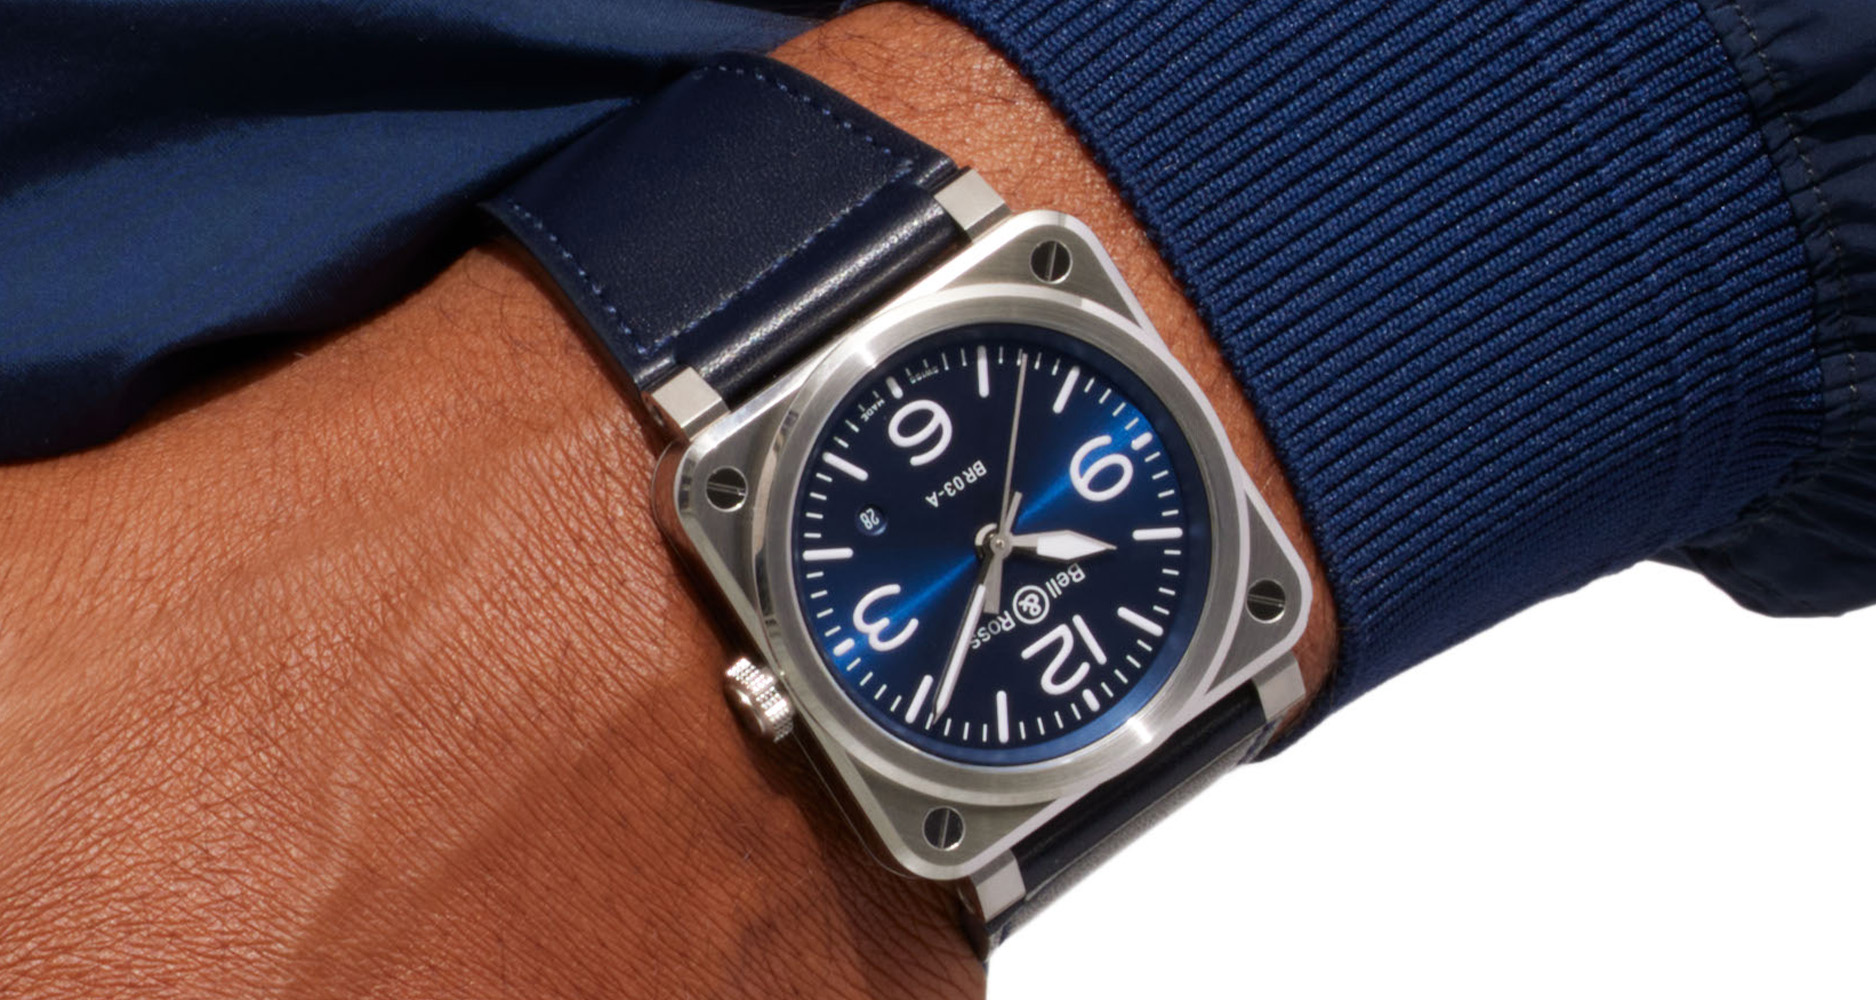 The Bell & Ross BR 03-A in stainless steel case with blue sunray dial.